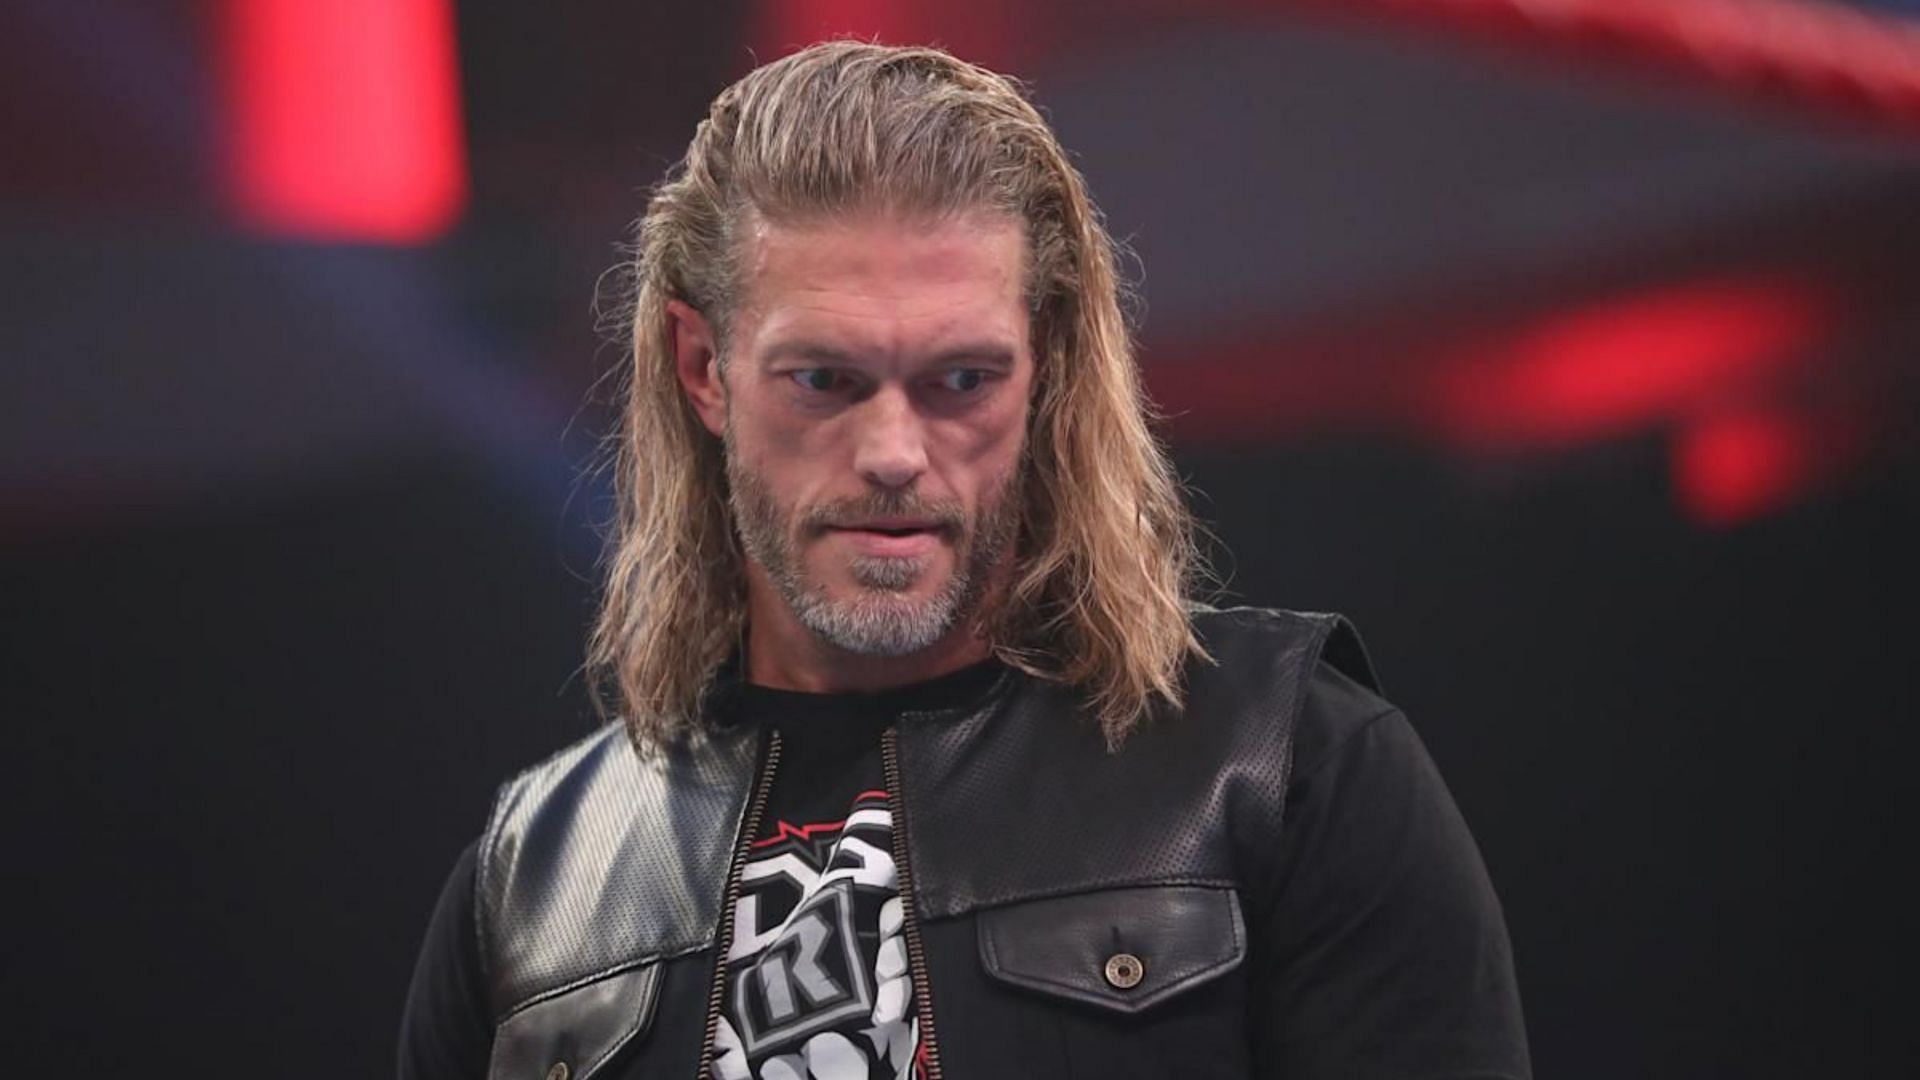 WWE Hall of Famer Edge could be retiring soon